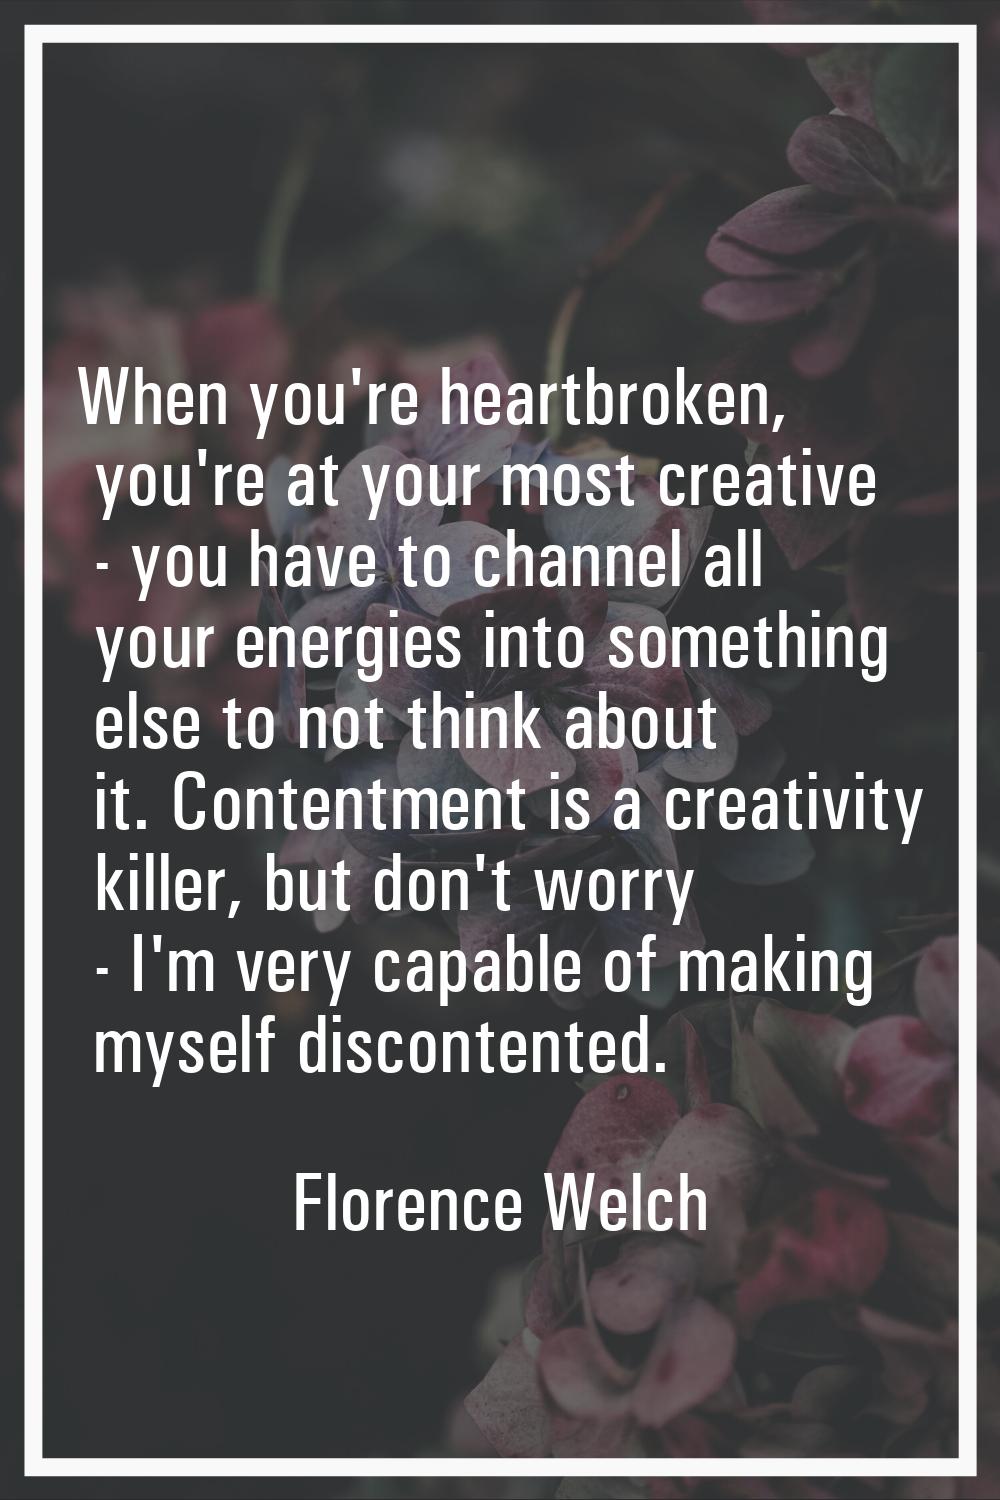 When you're heartbroken, you're at your most creative - you have to channel all your energies into 